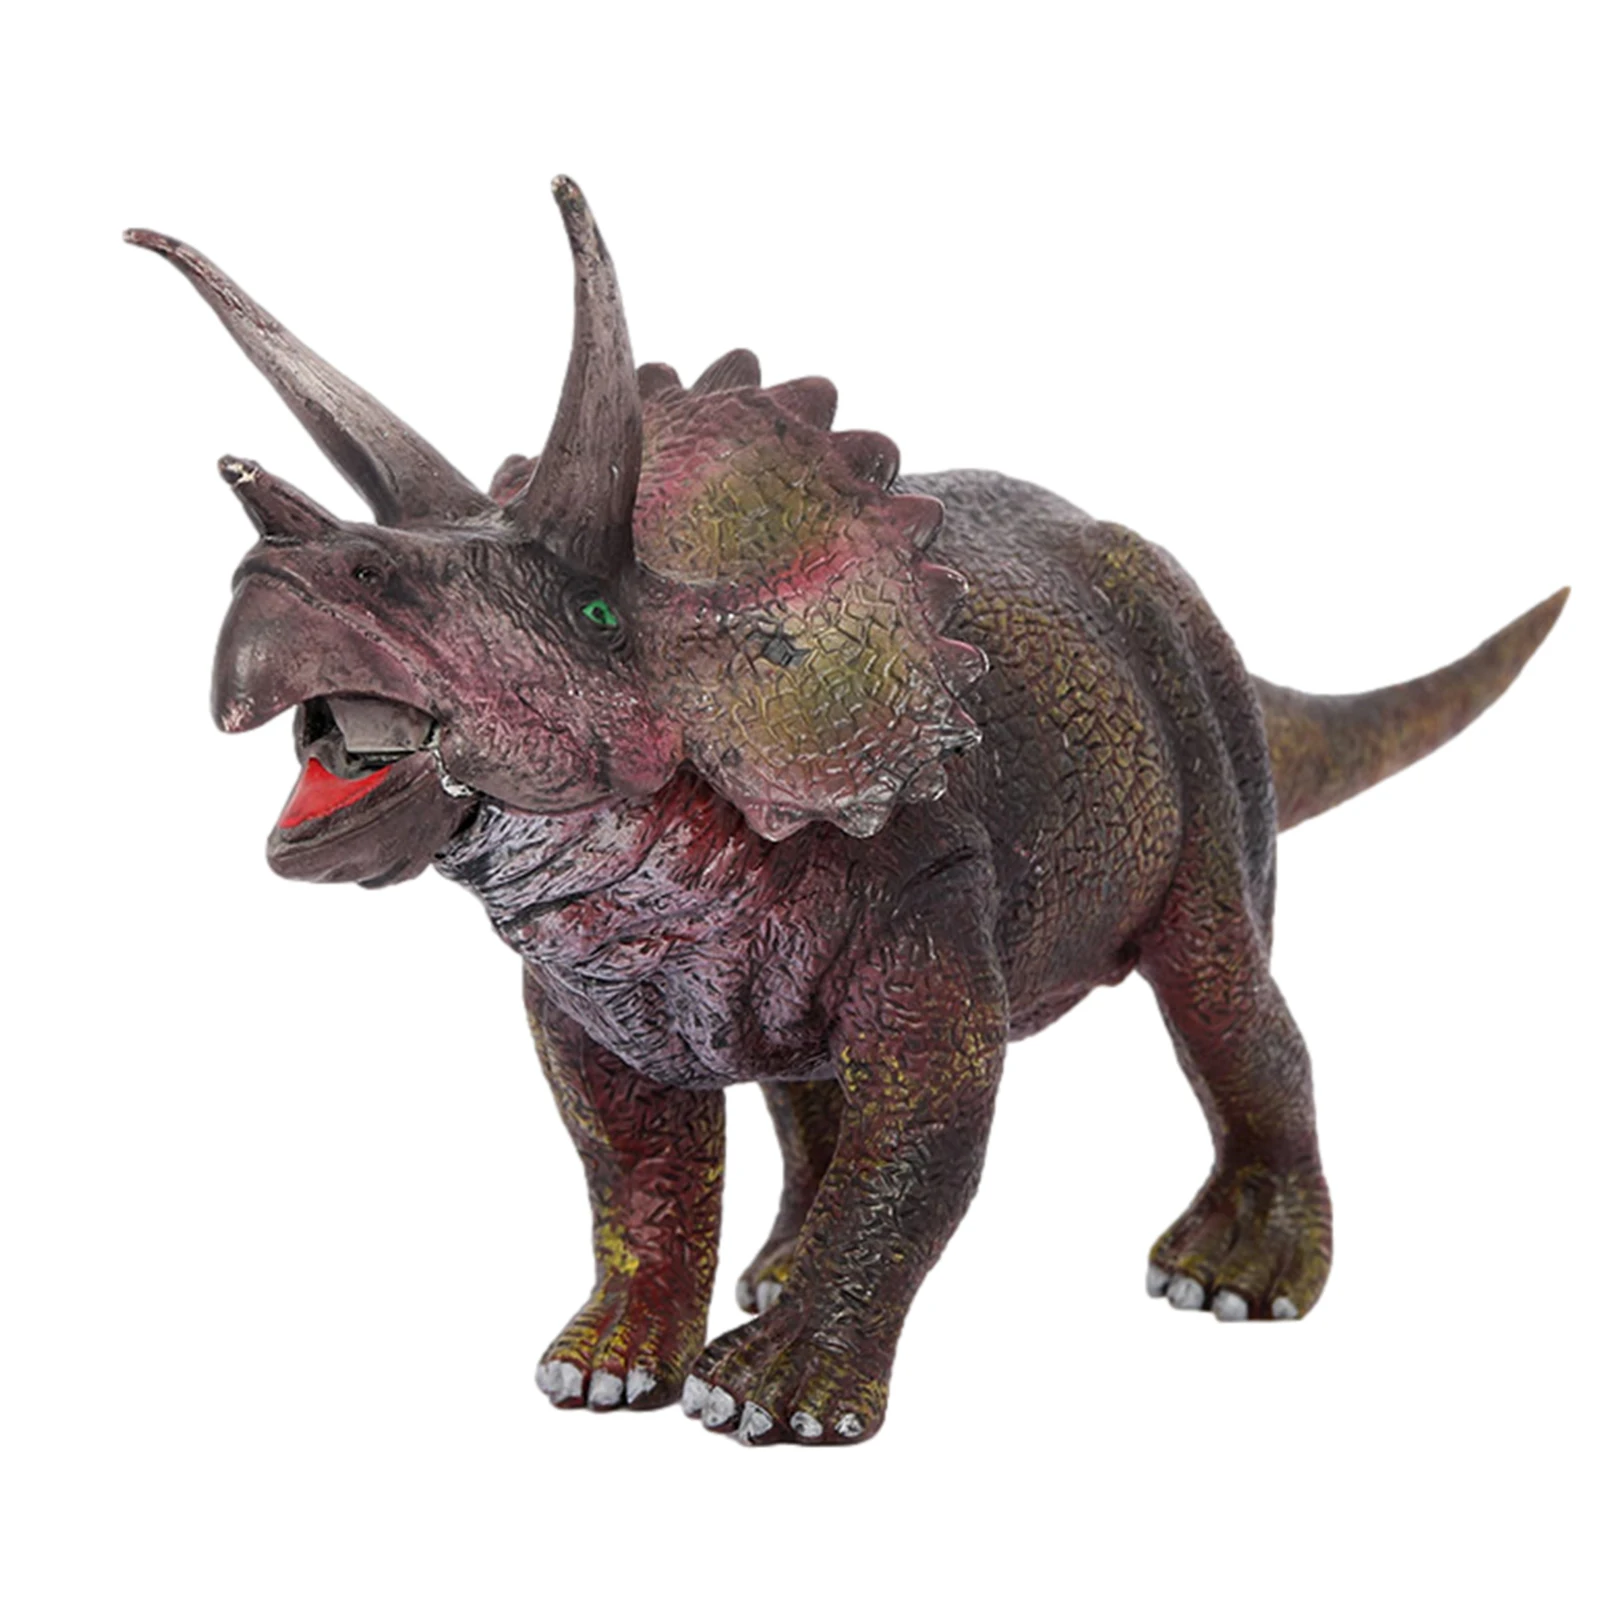 

Triceratops Dinosaur Toys Realistic Triceratops Dinosaur Figure Prehistoric Dinosaur Models Collector Gift For Boys And Girls